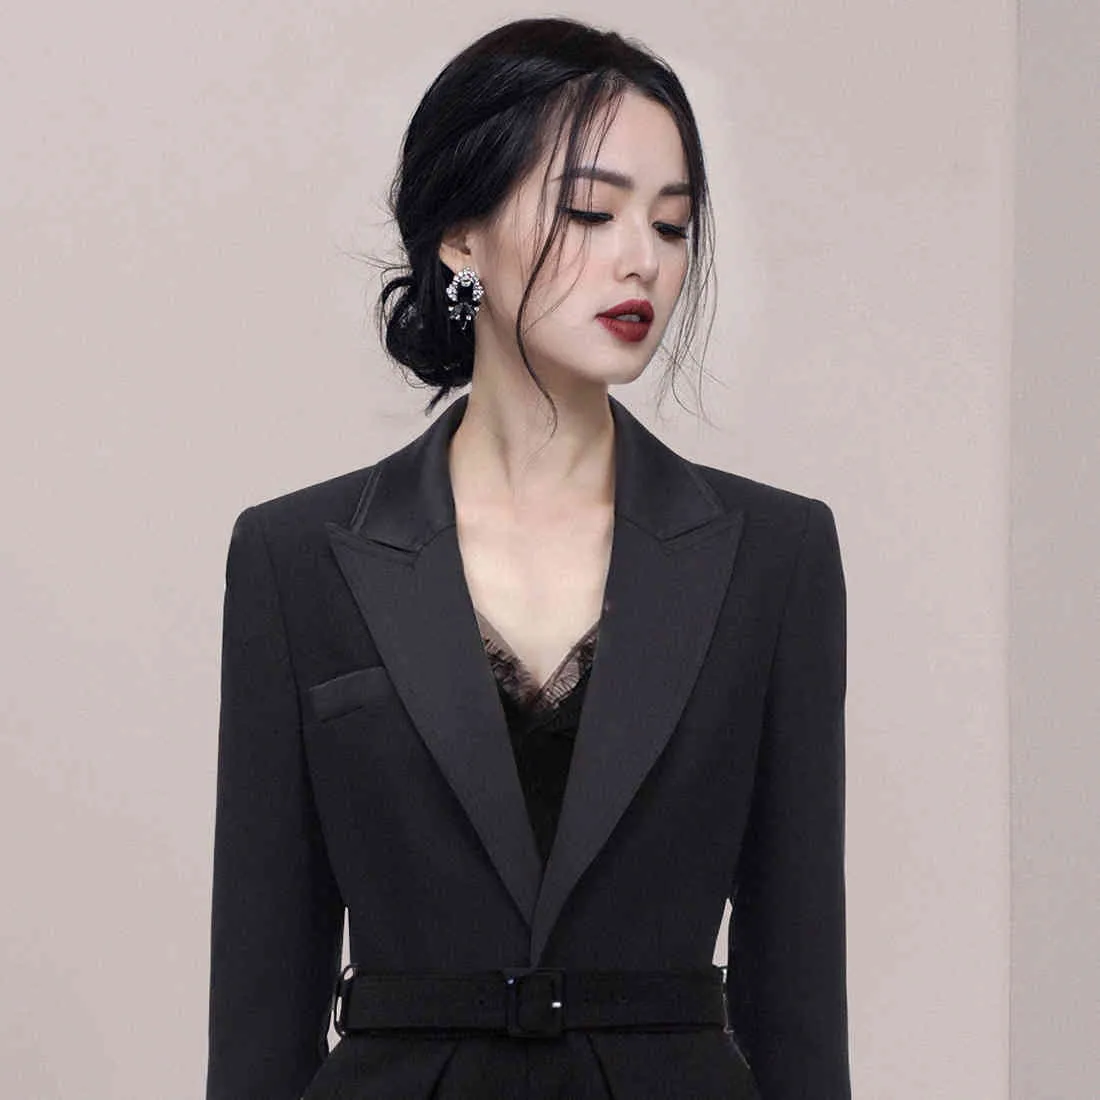 autumn and summer fashion women clothes full sleeves lace pathcwork high waist black bodysuit WP86501L 210421